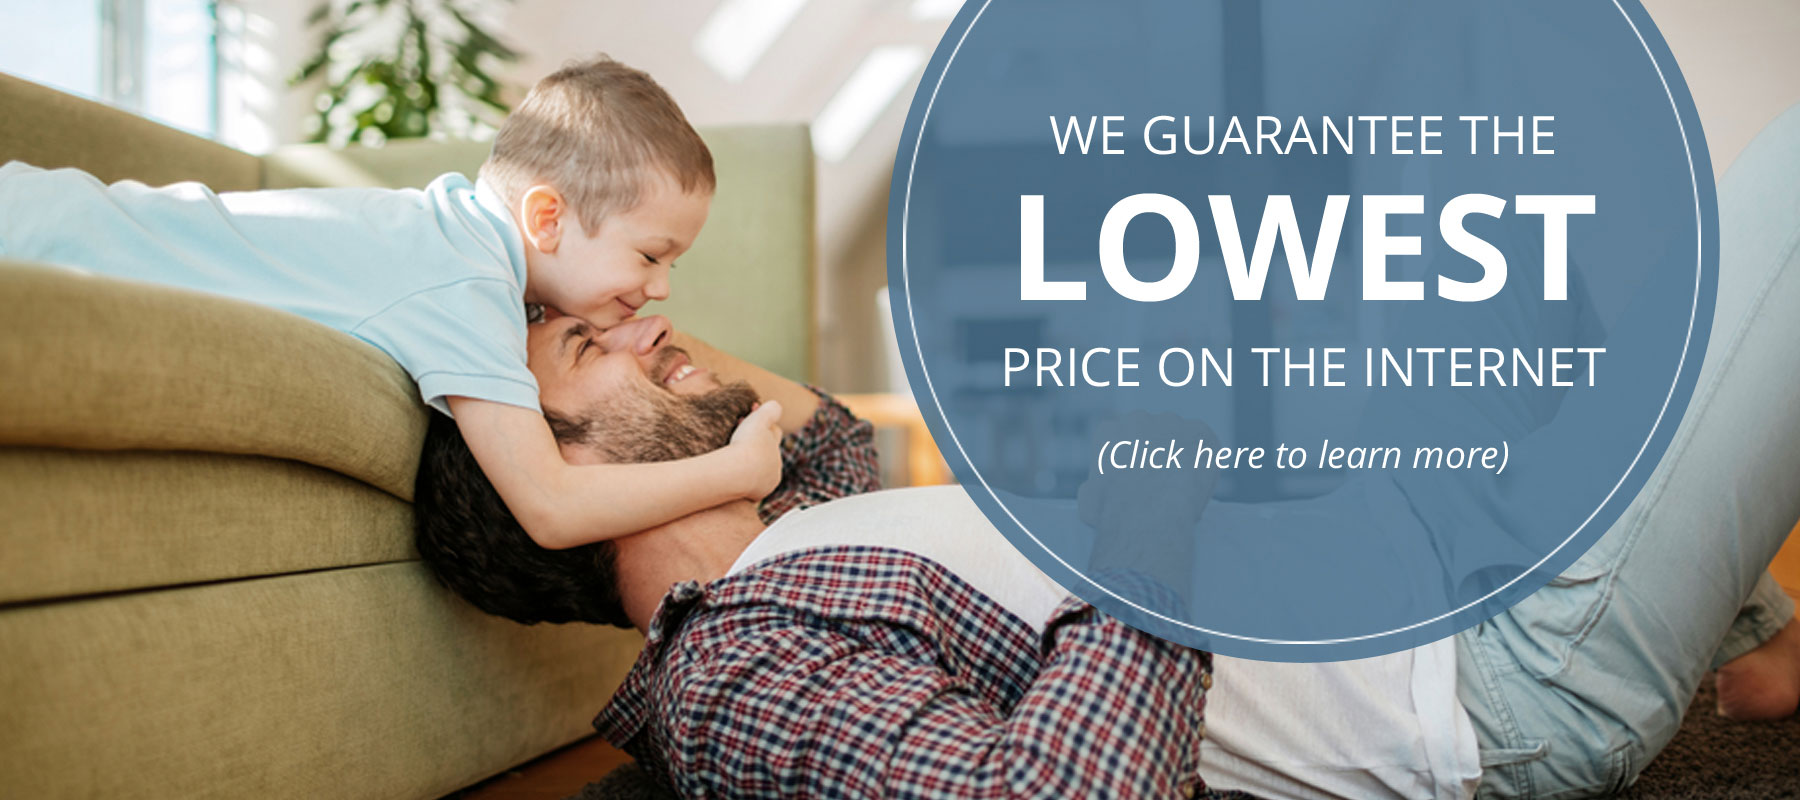 We Guarantee the Lowest Price on the Internet. (Click here to learn more)